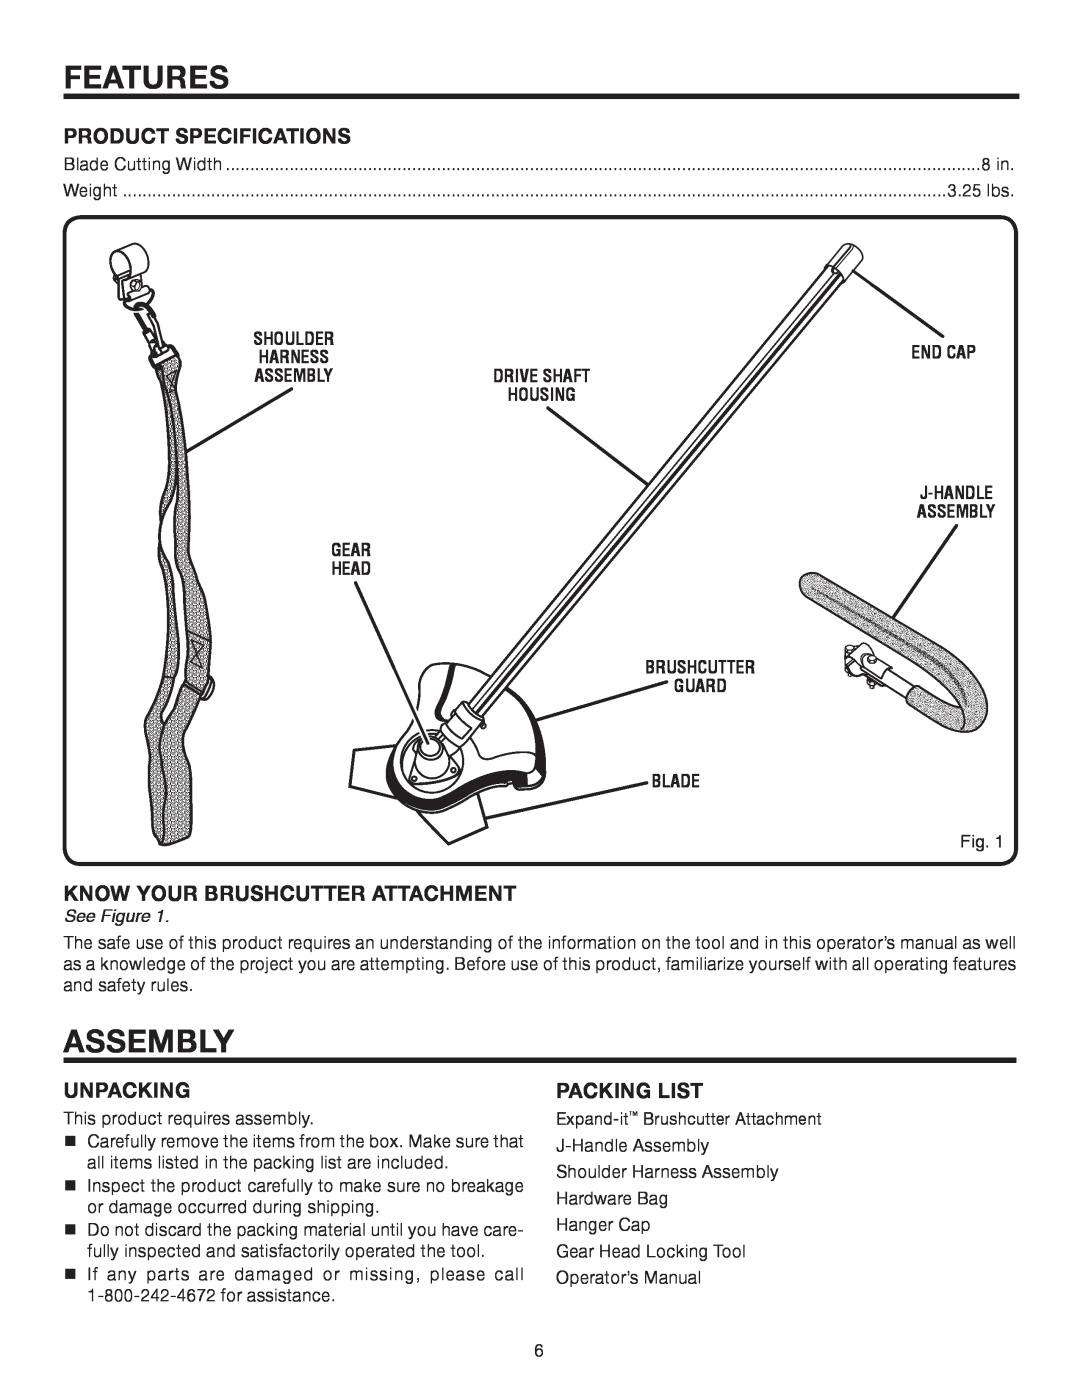 Ryobi UT15702B manual Features, Assembly, Product Specifications, Know Your Brushcutter Attachment, Unpacking, Packing List 